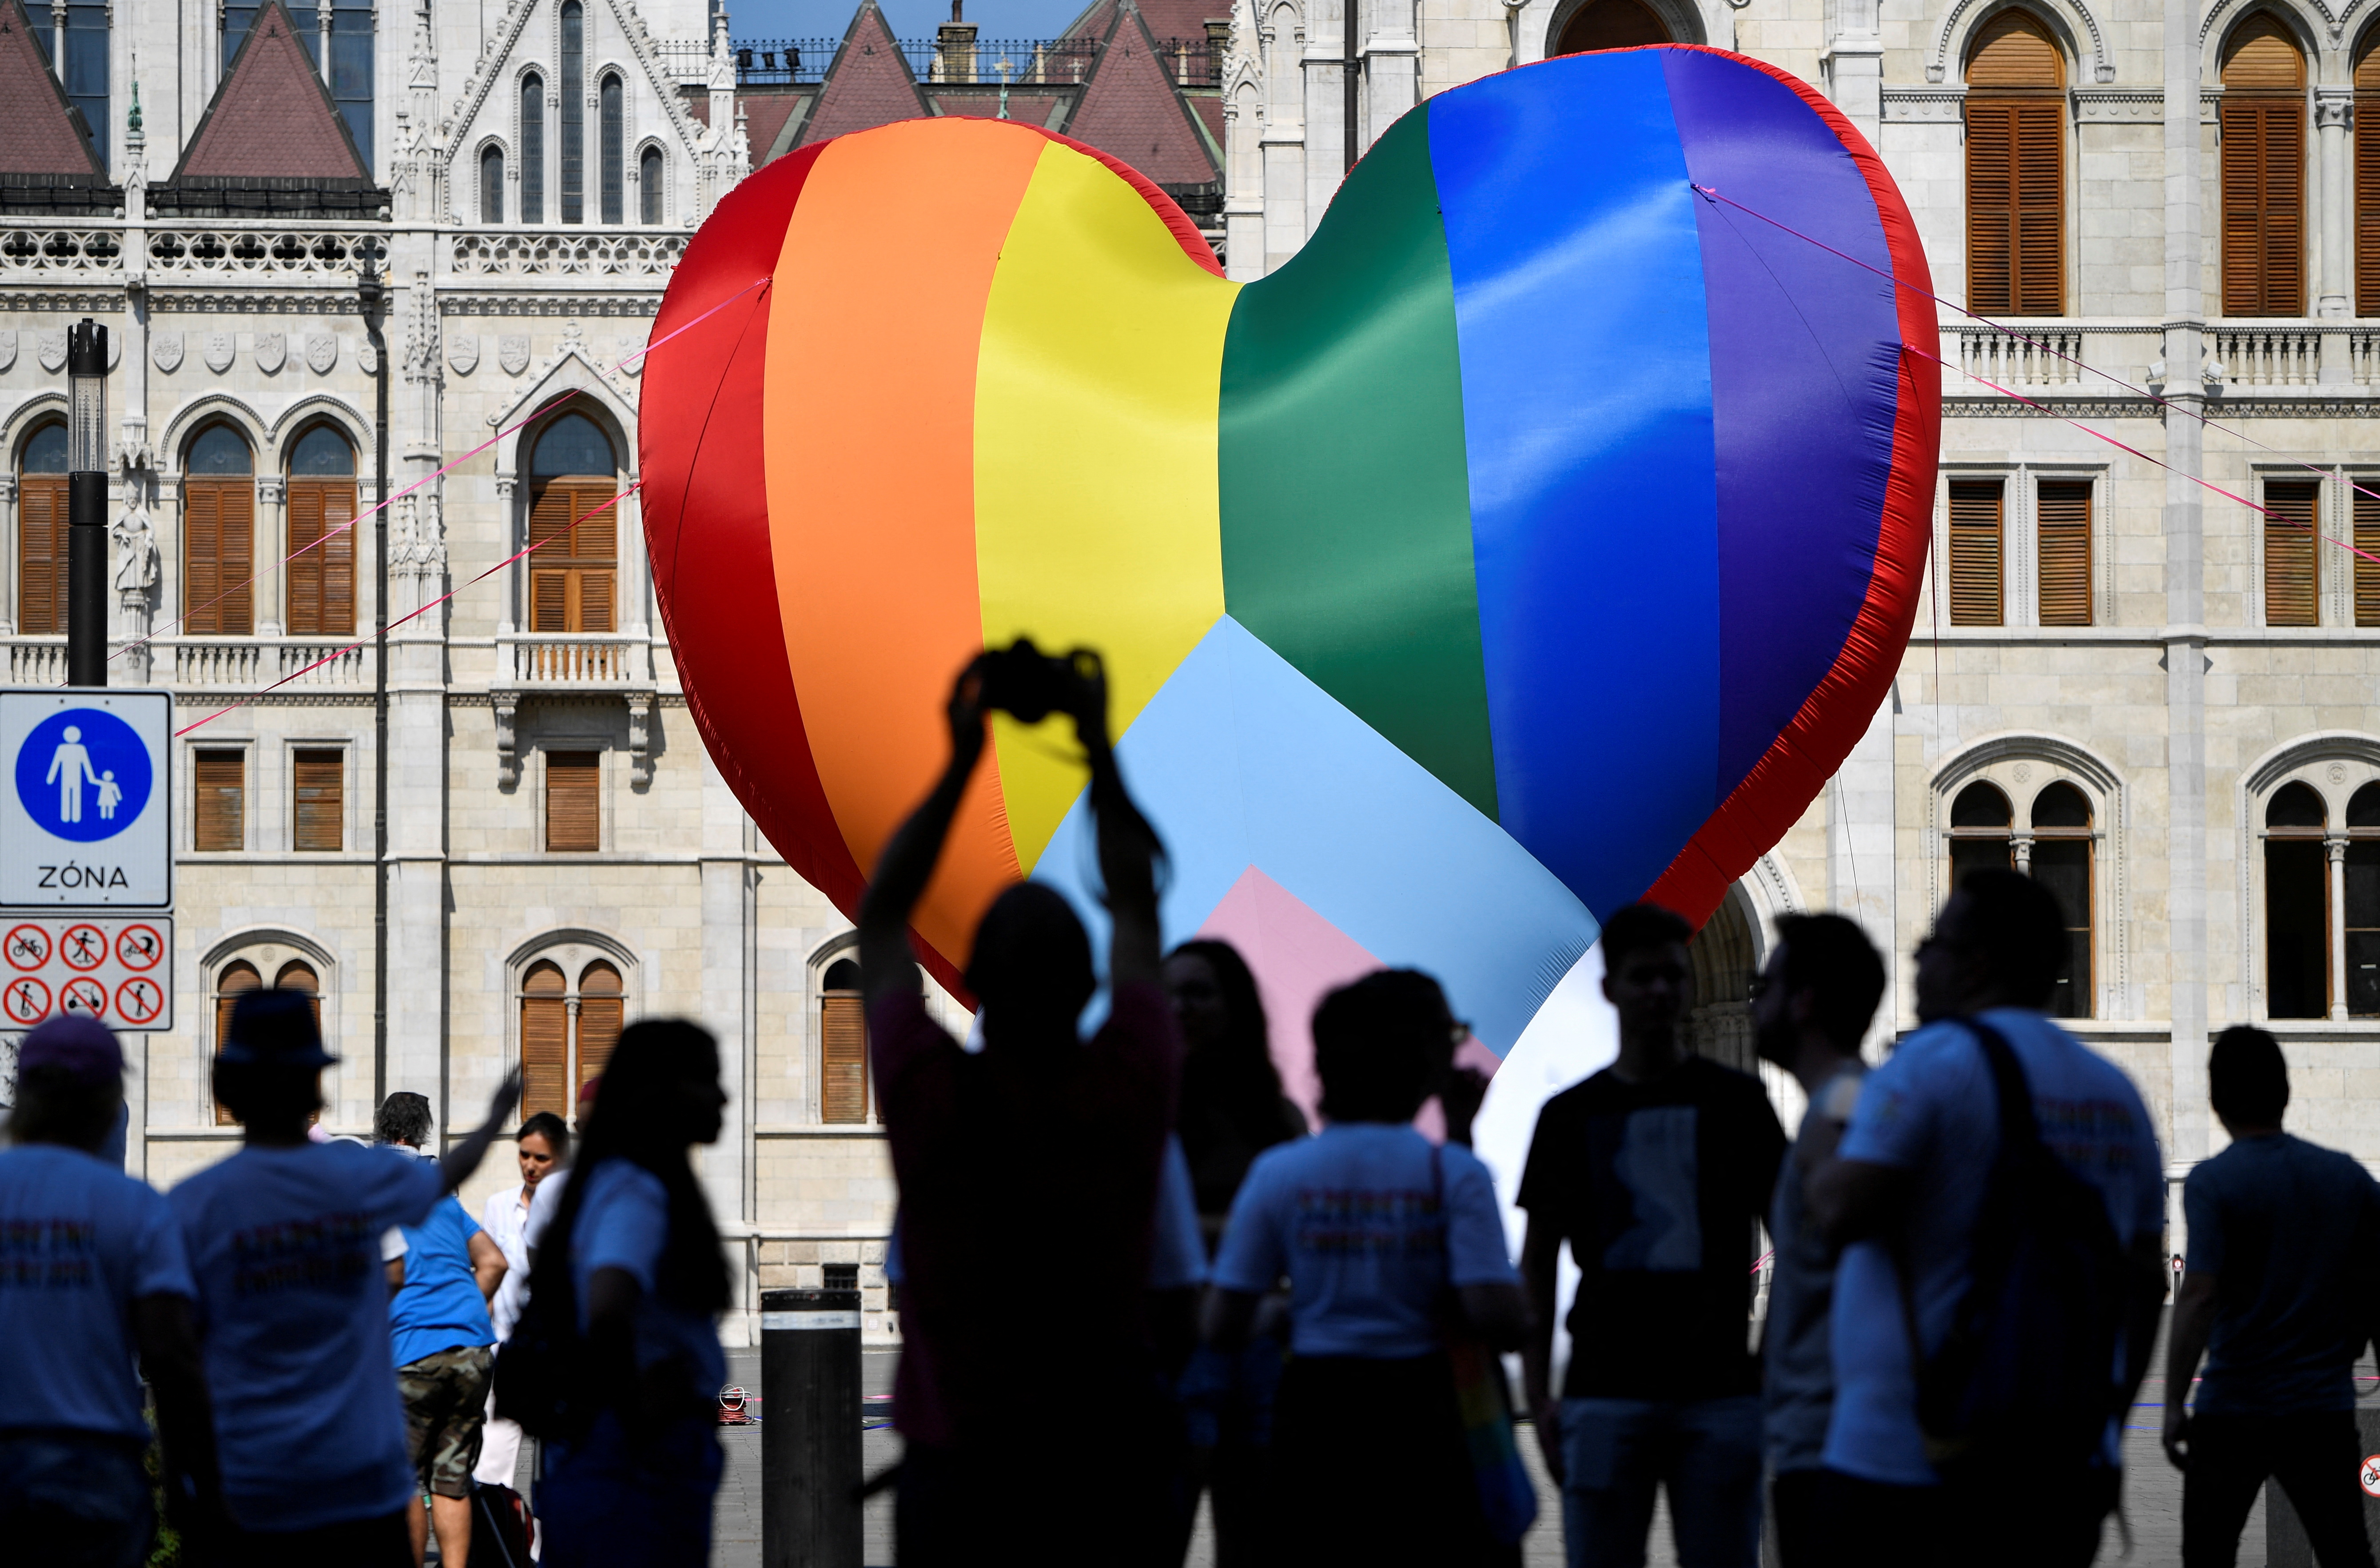 People gather in front of a huge rainbow balloon put up by members of Amnesty International and Hatter, an NGO promoting LGBT rights, at Hungary's parliament in Budapest, Hungary, July 8, 2021. REUTERS/Marton Monus/Files